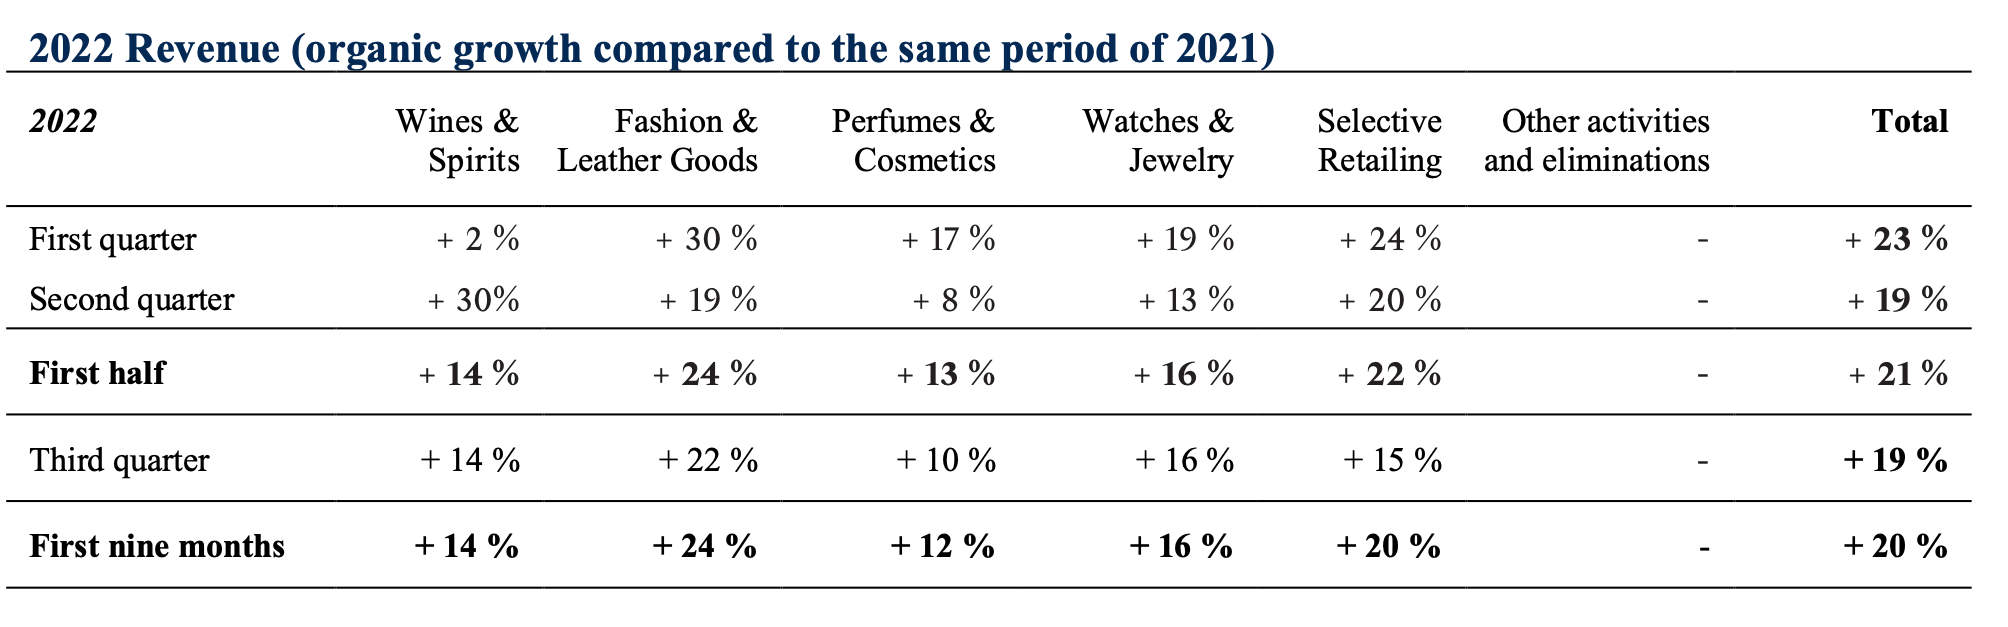 Quartr on X: $LVMH 2022 (organic growth): Louis Vuitton's revenue  surpassed €20B for the first time Revenue +17% *Wines & Spirits +11%  *Fashion & Leather Goods +20% *Perfumes & Cosmetics +10% *Watches